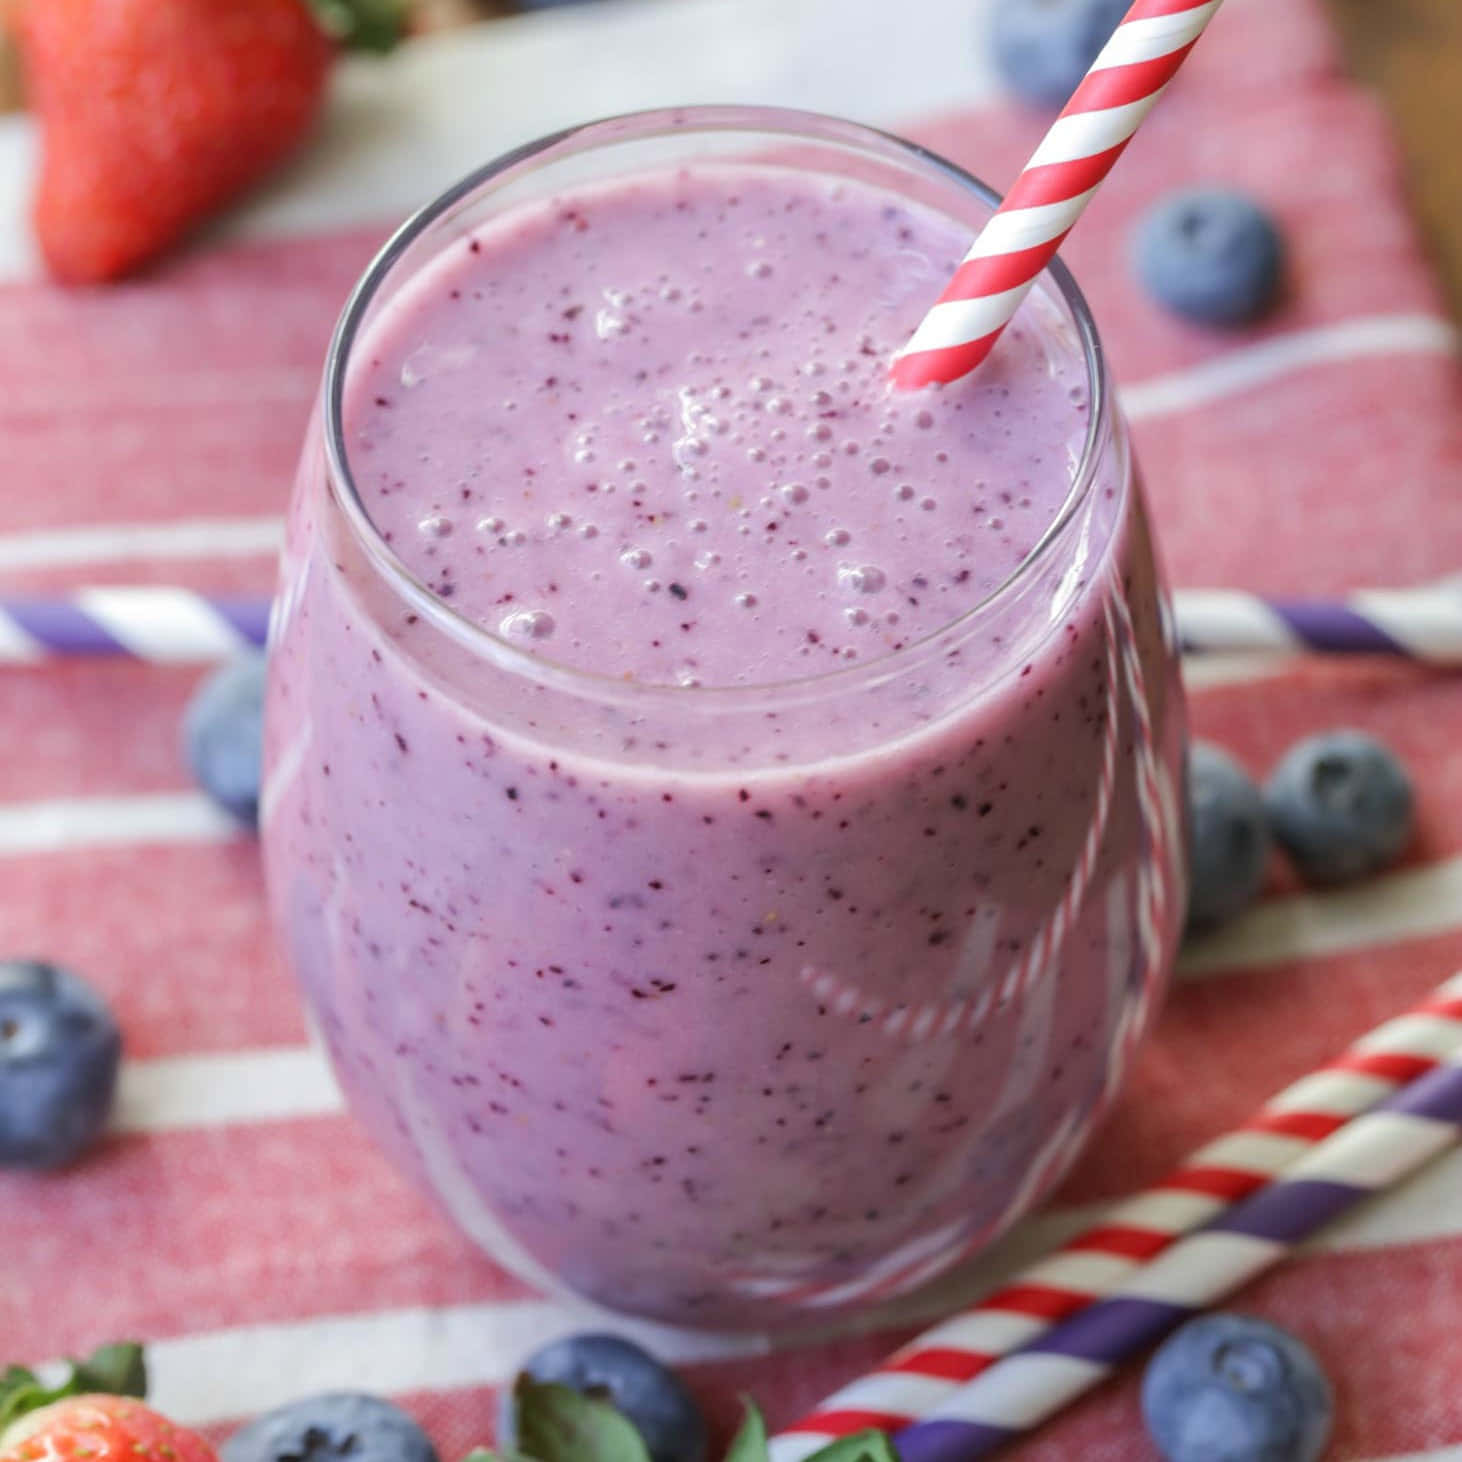 Enjoy the delicious, velvety melt-in-your-mouth goodness of a fresh, natural Blueberry Smoothie Wallpaper